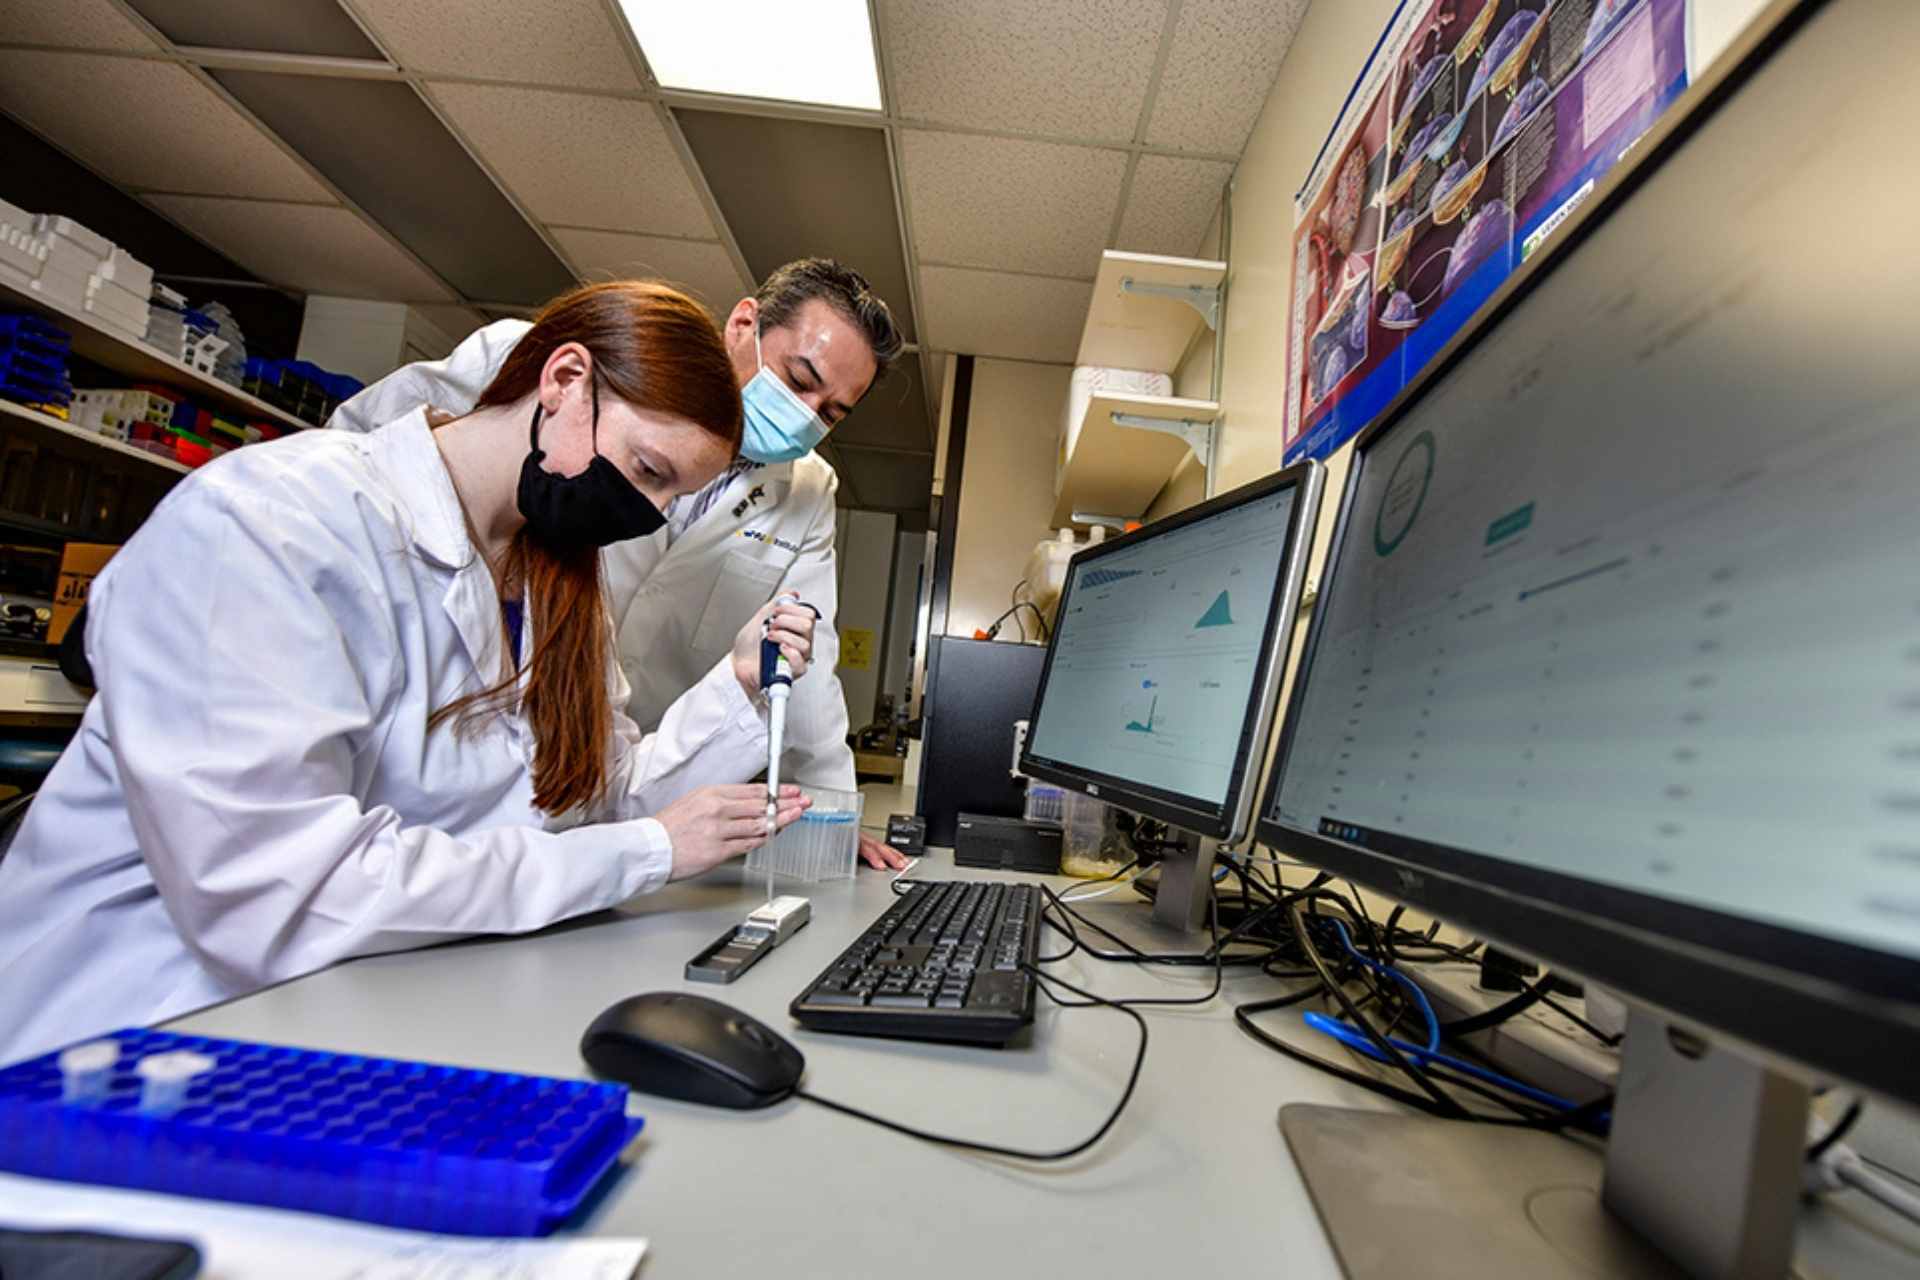 Emily Westemeier, a graduate student, sequences cancer tissue samples with Ivan Martinez, associate professor in the WVU School of Medicine. The University has been maintained its R1 status as a “very high research activity” institution, according to the Carnegie Classification of Institutions of Higher Education. (WVU Photo/Brian Persinger)